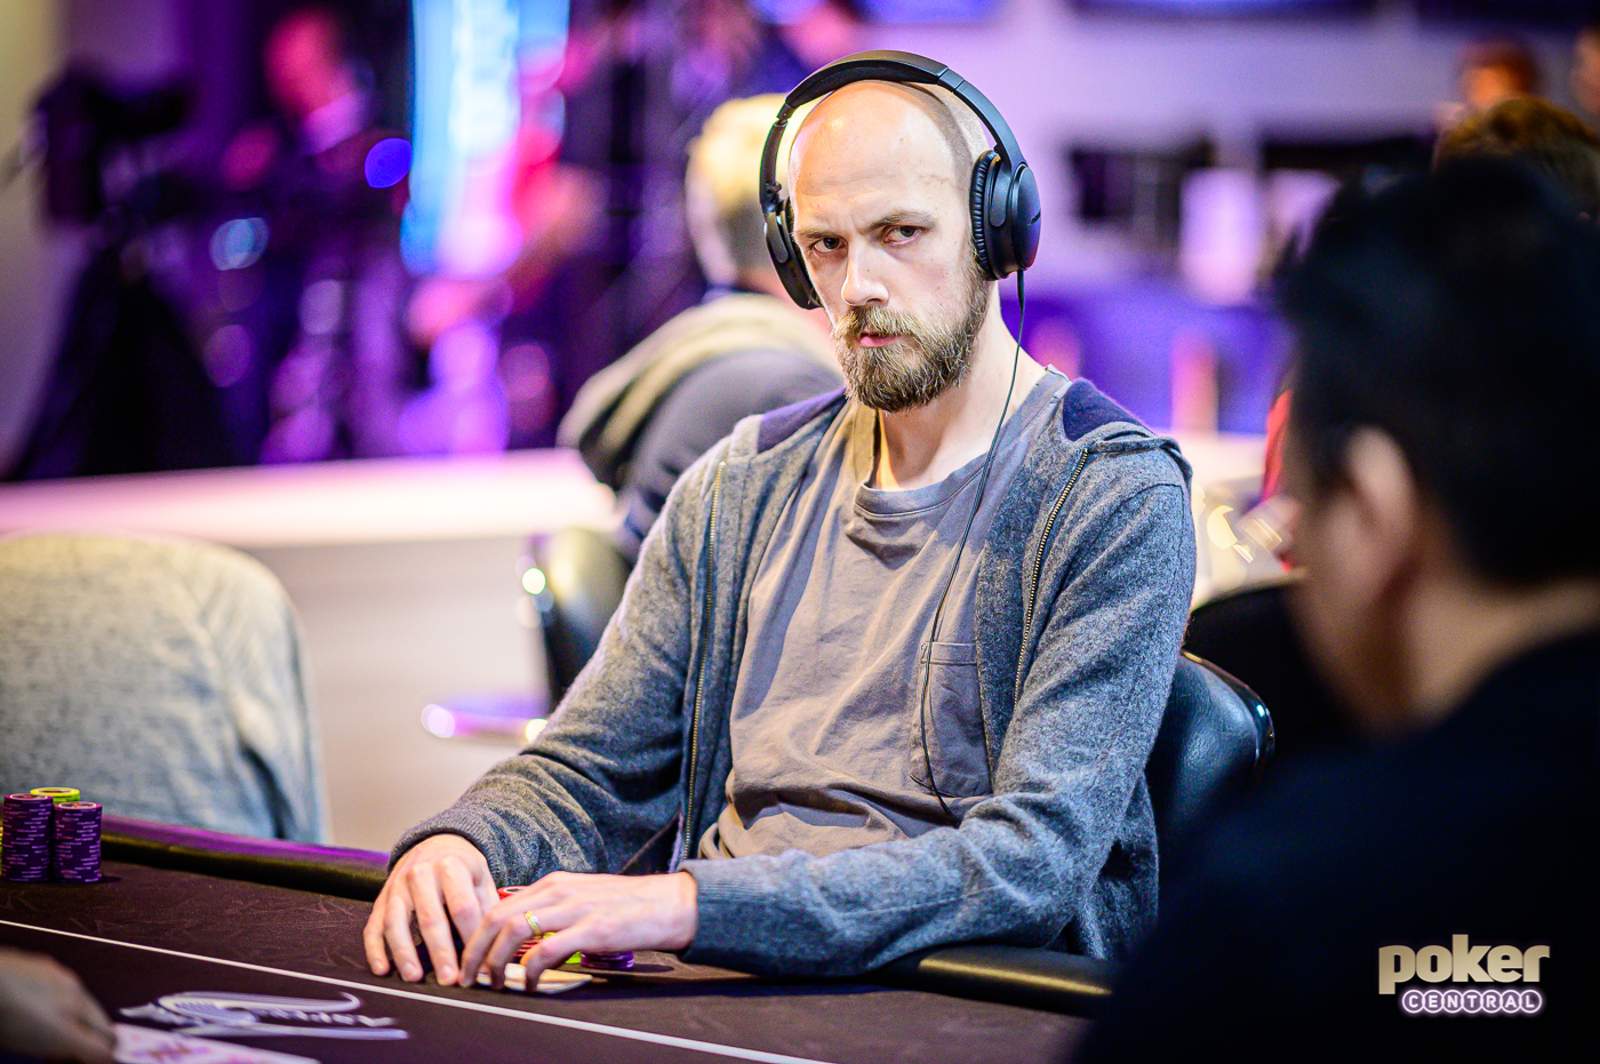 George Wolff Leads British Poker Open Event #2 Final Table, Stephen Chidwick in Contention